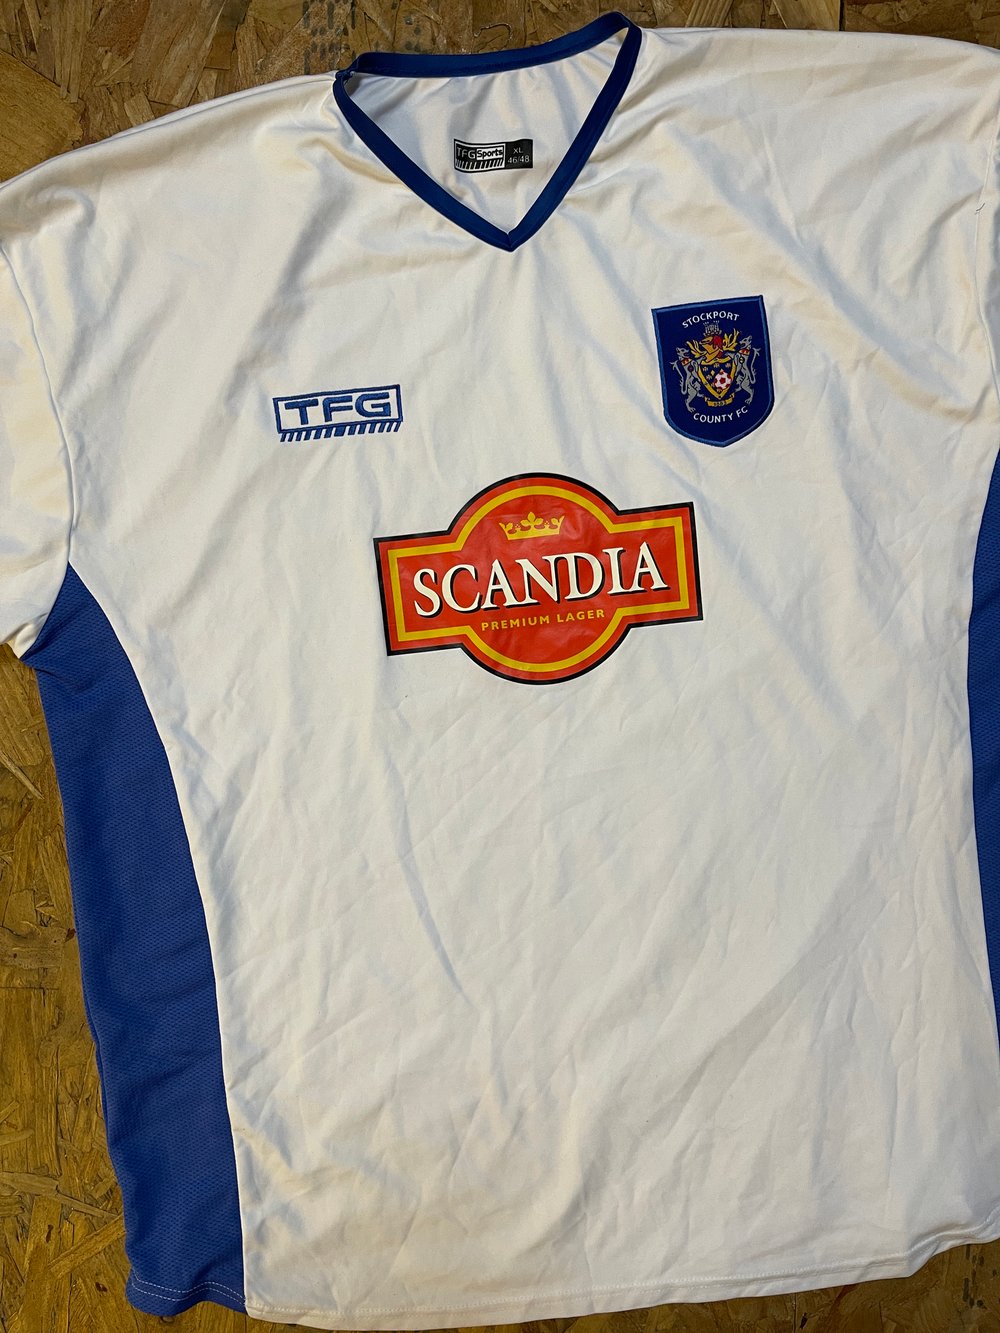 Player Issue 2004/05 TFG Away Shirt